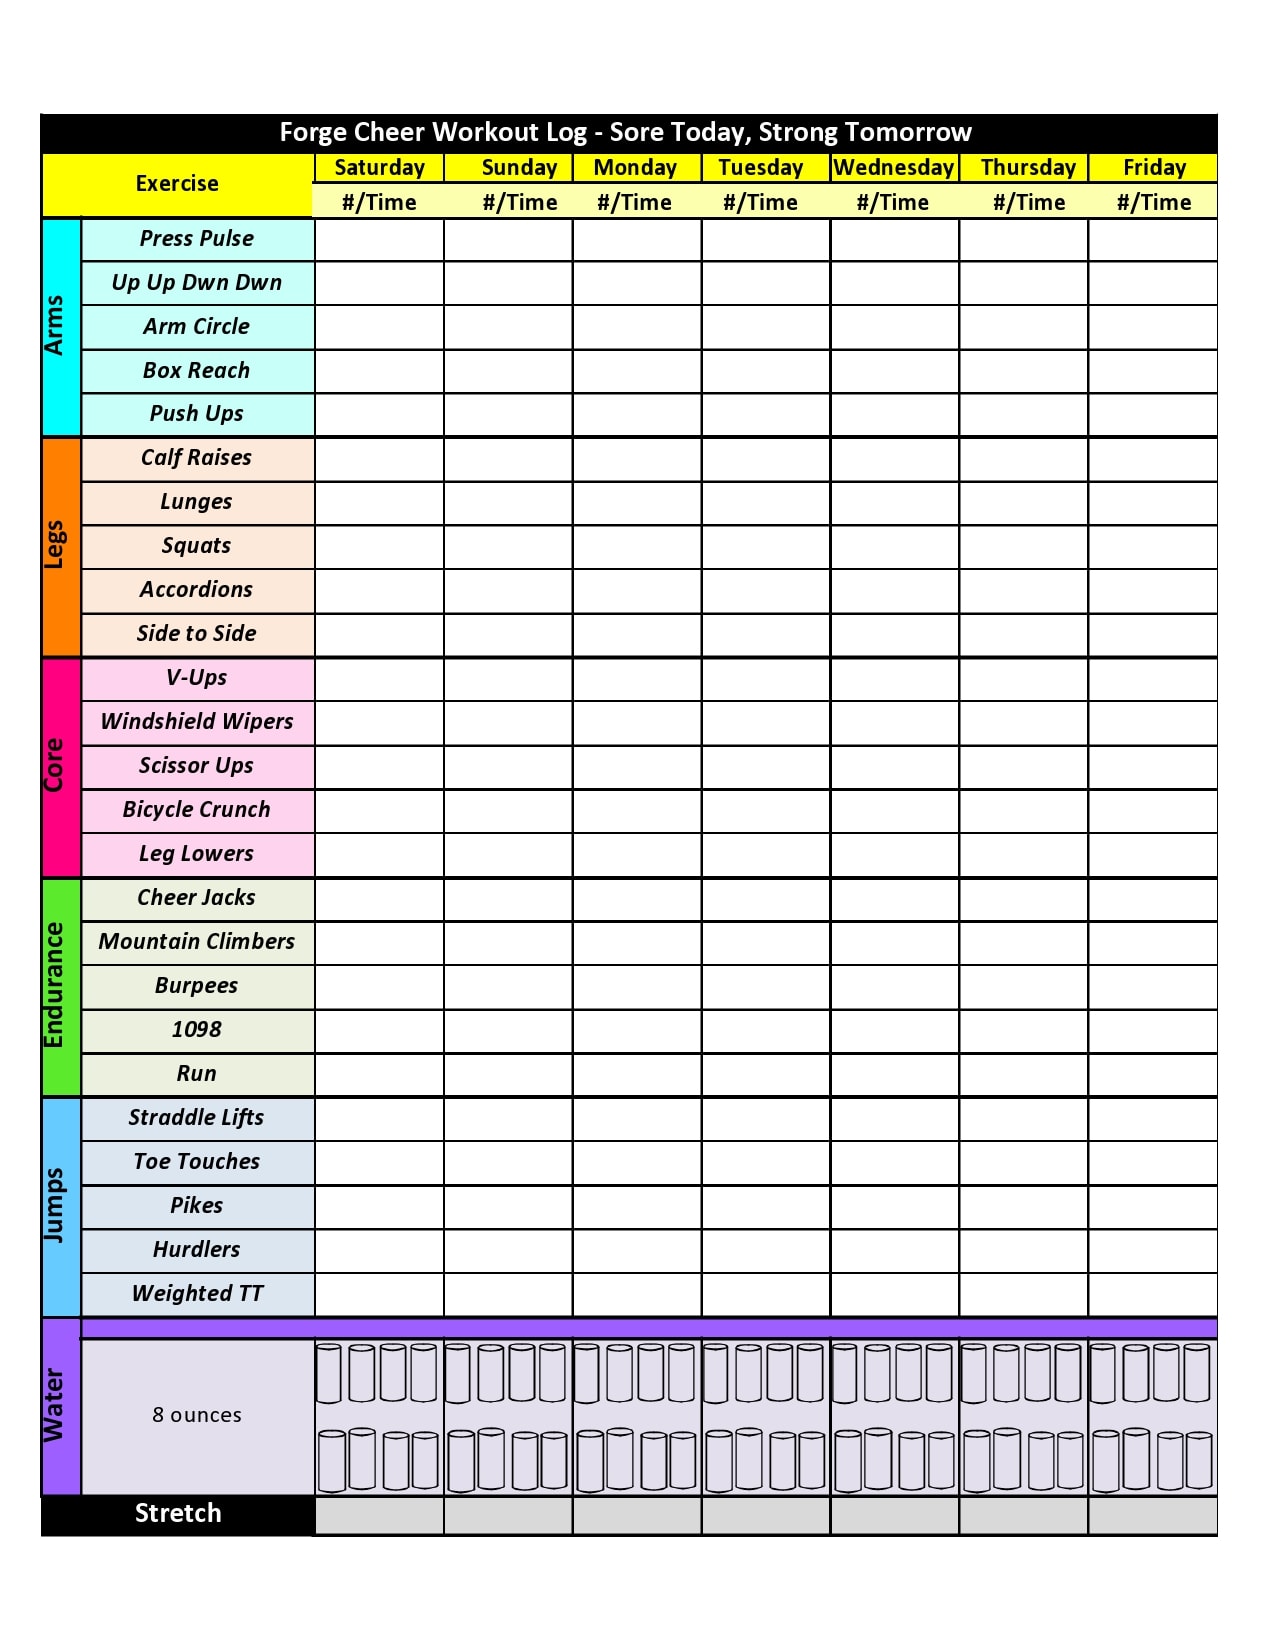 Excel Workout Schedule Template Advancefiber in